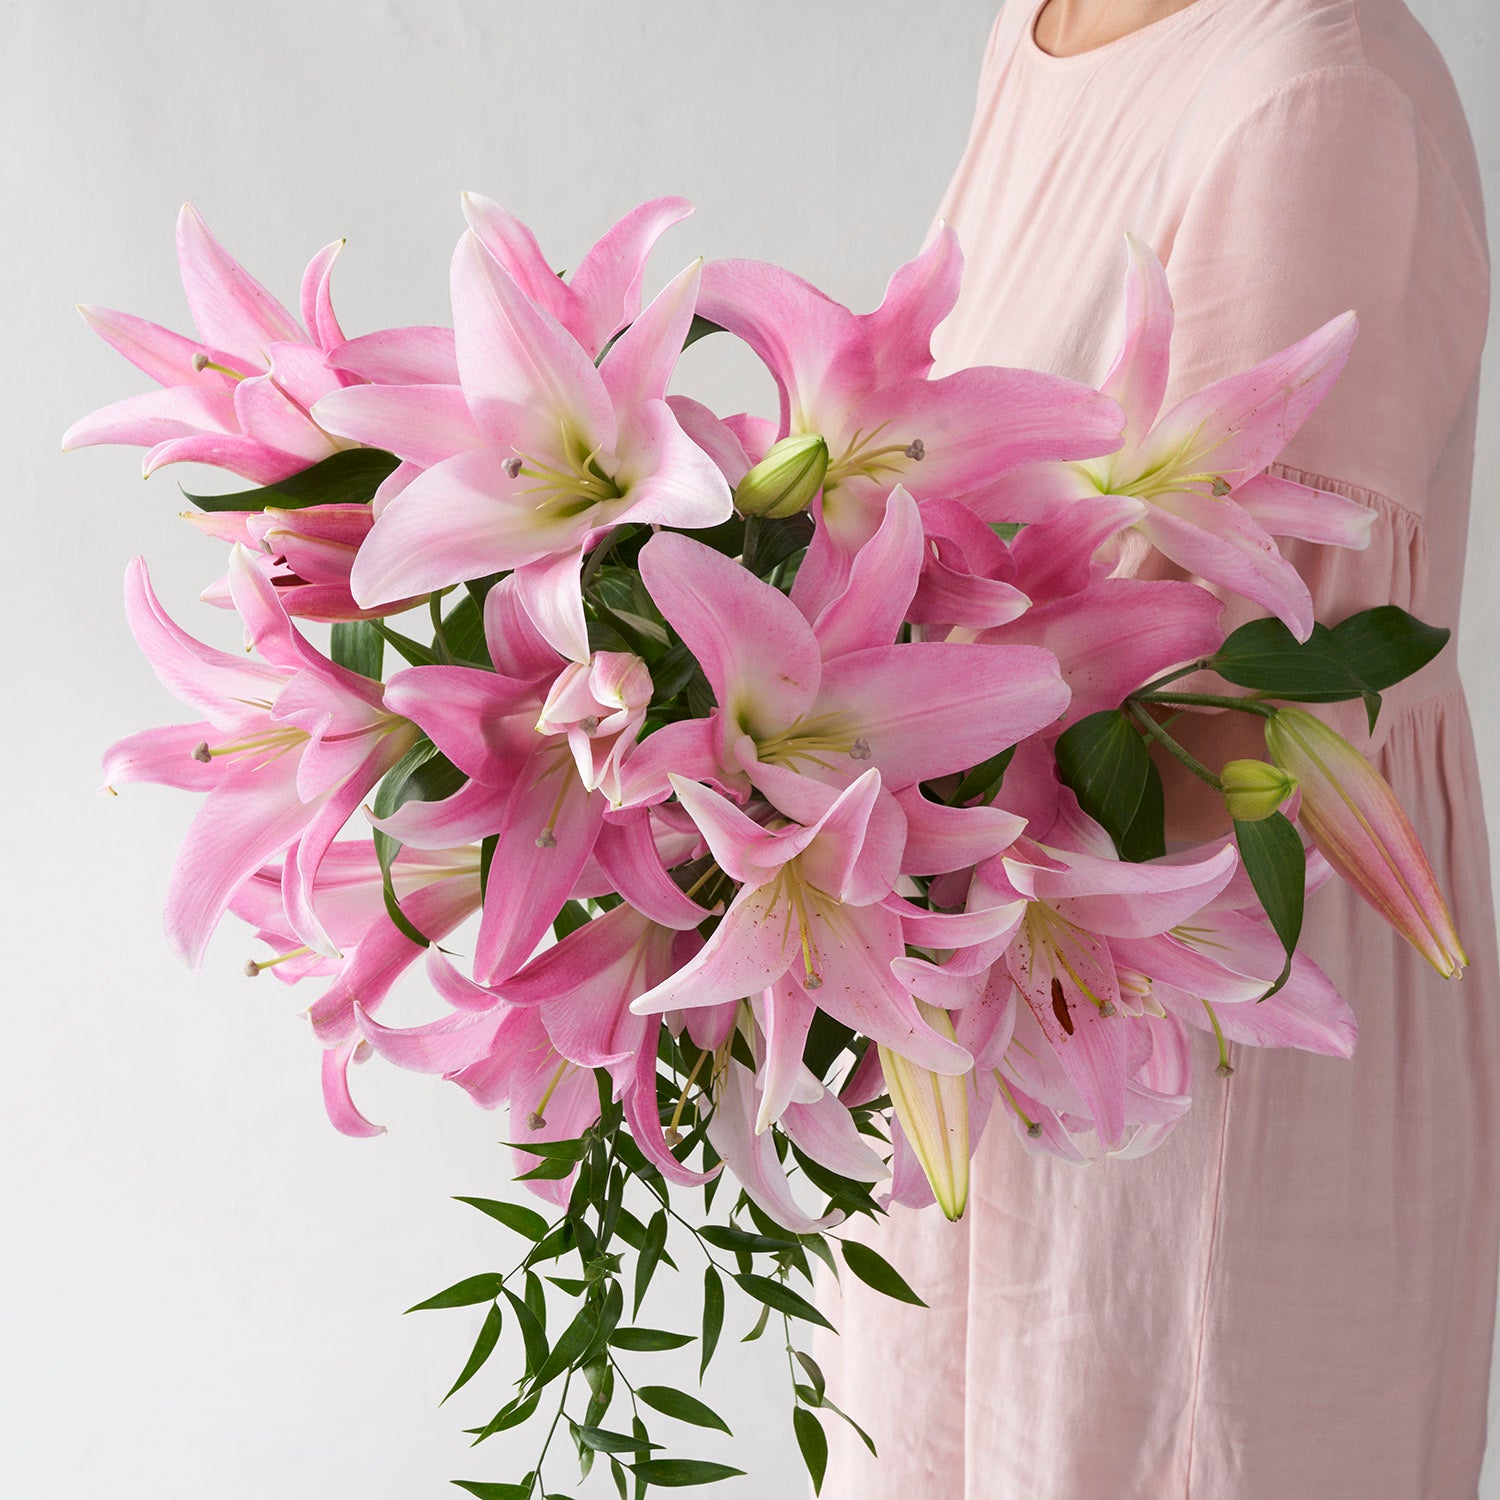 Woman in pale pink dress holding large bouquet of pink lilies.